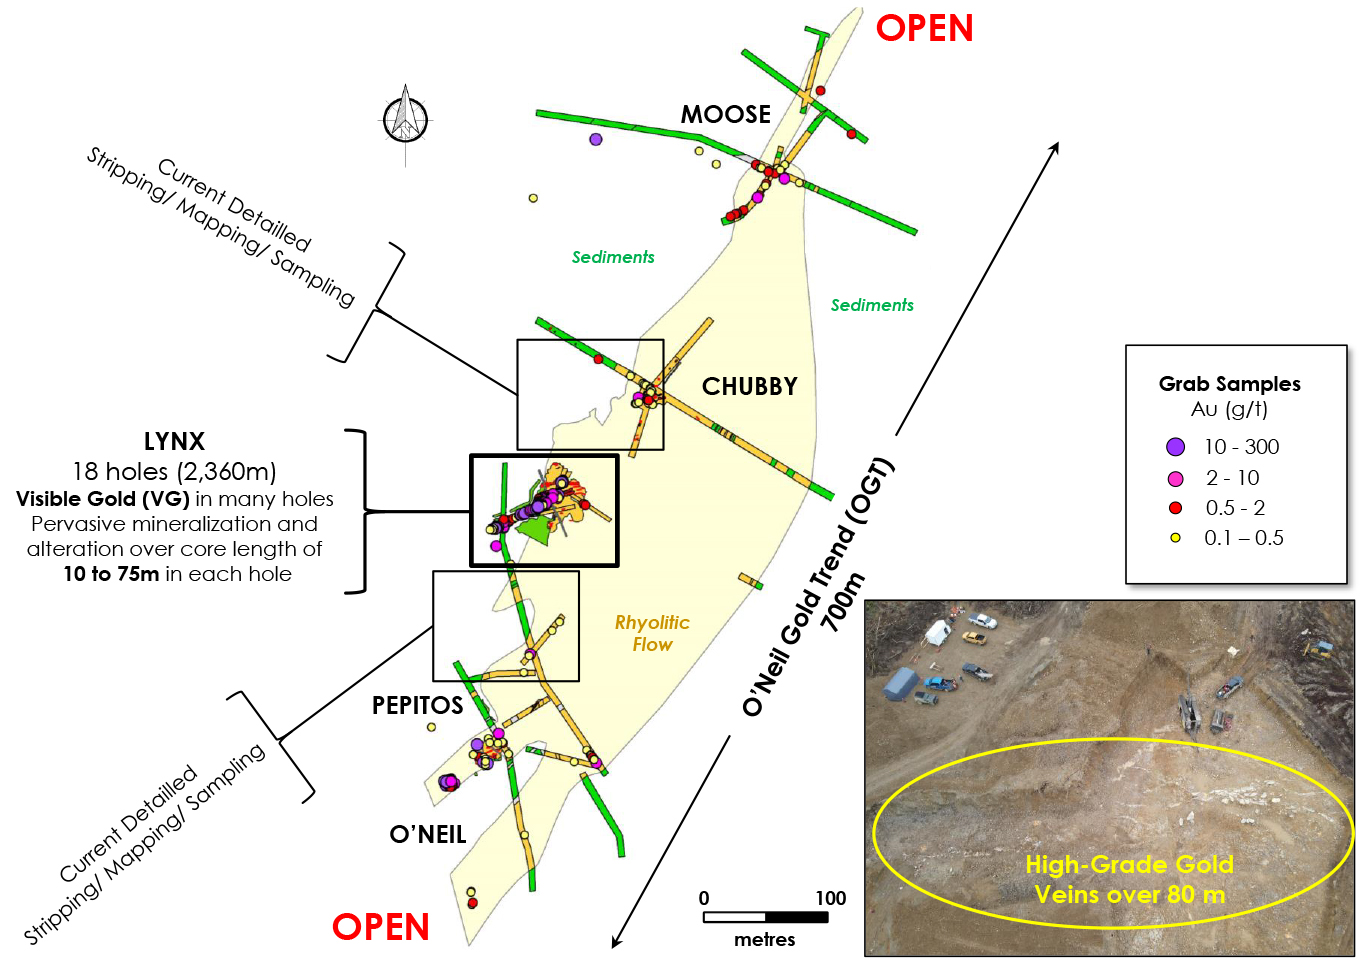 Figure 3: Geological Mapping of the O’Neil Gold Trend (OGT)